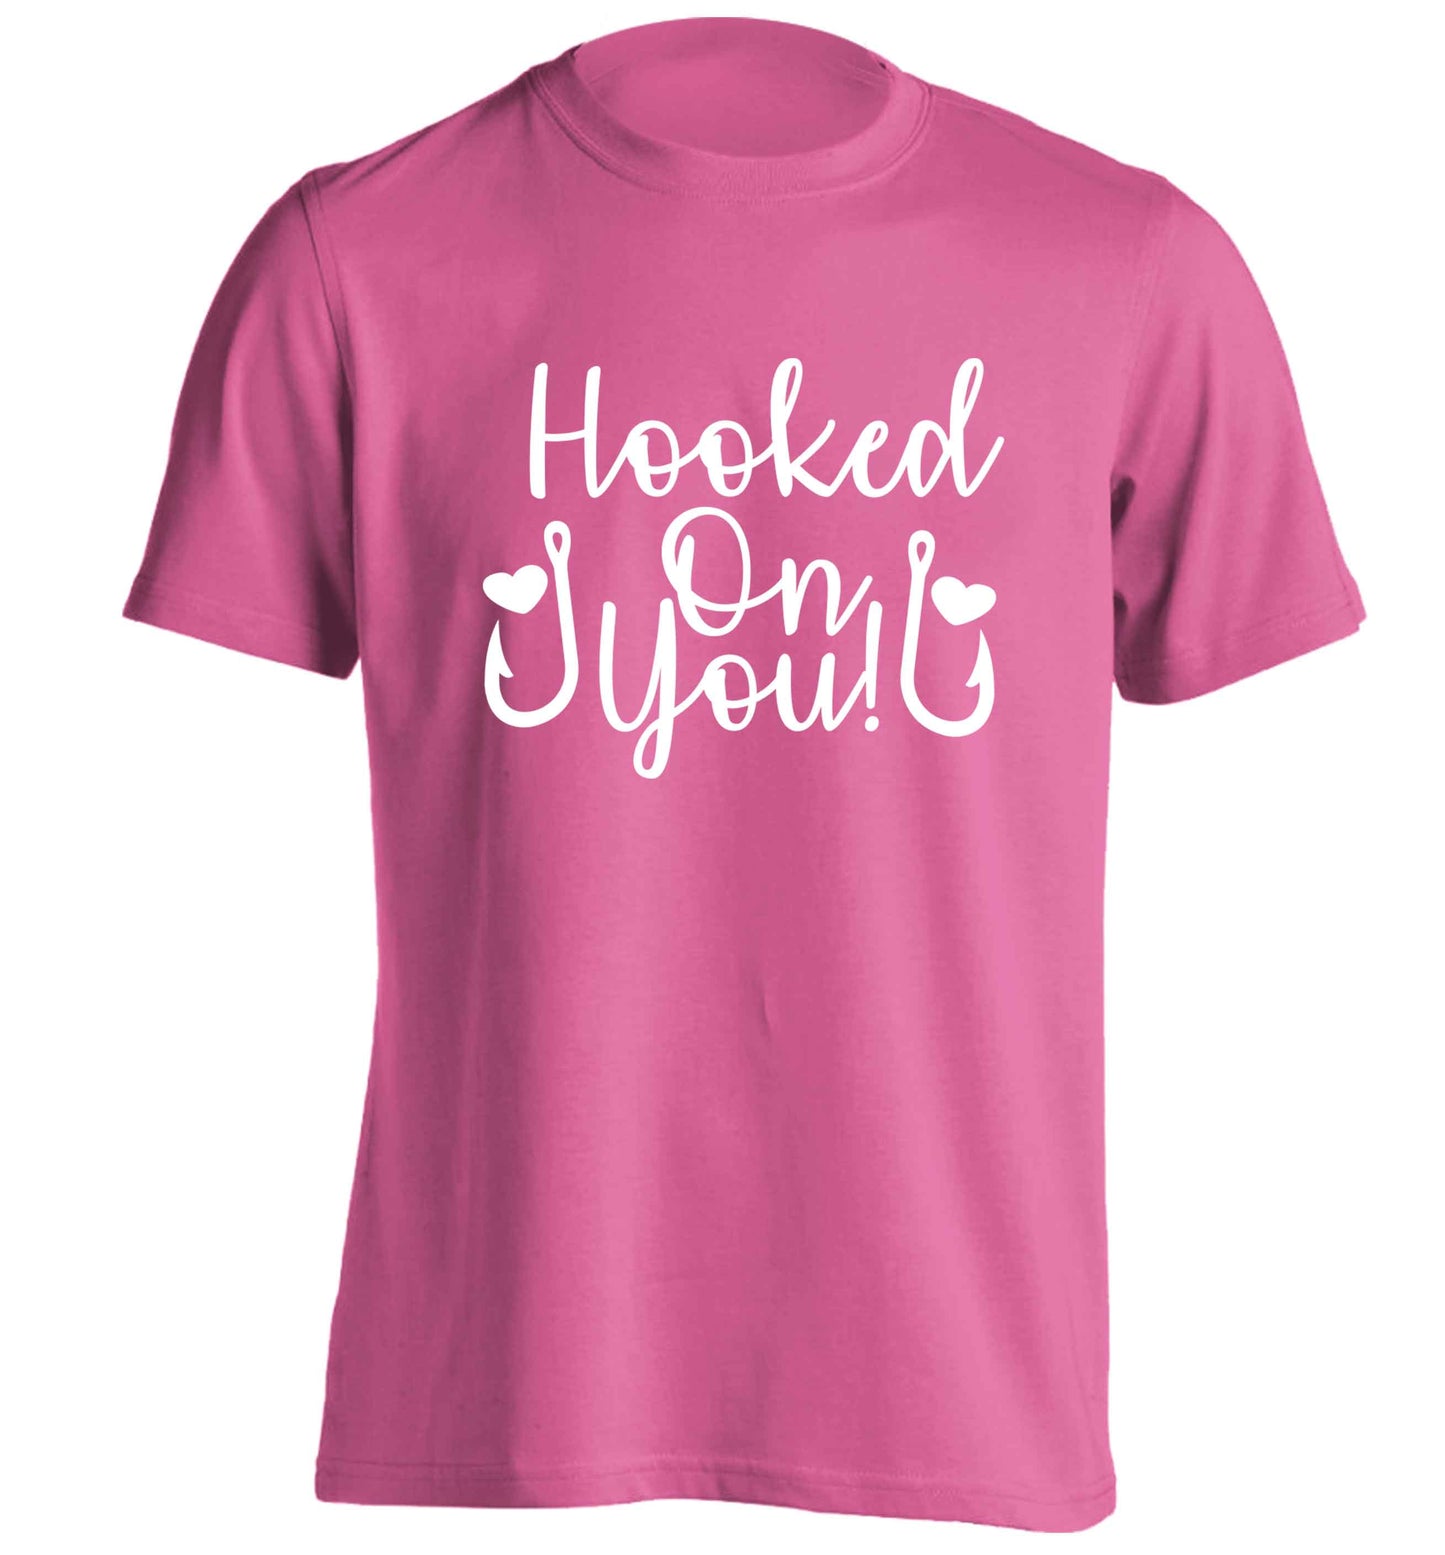 Hooked on you adults unisex pink Tshirt 2XL